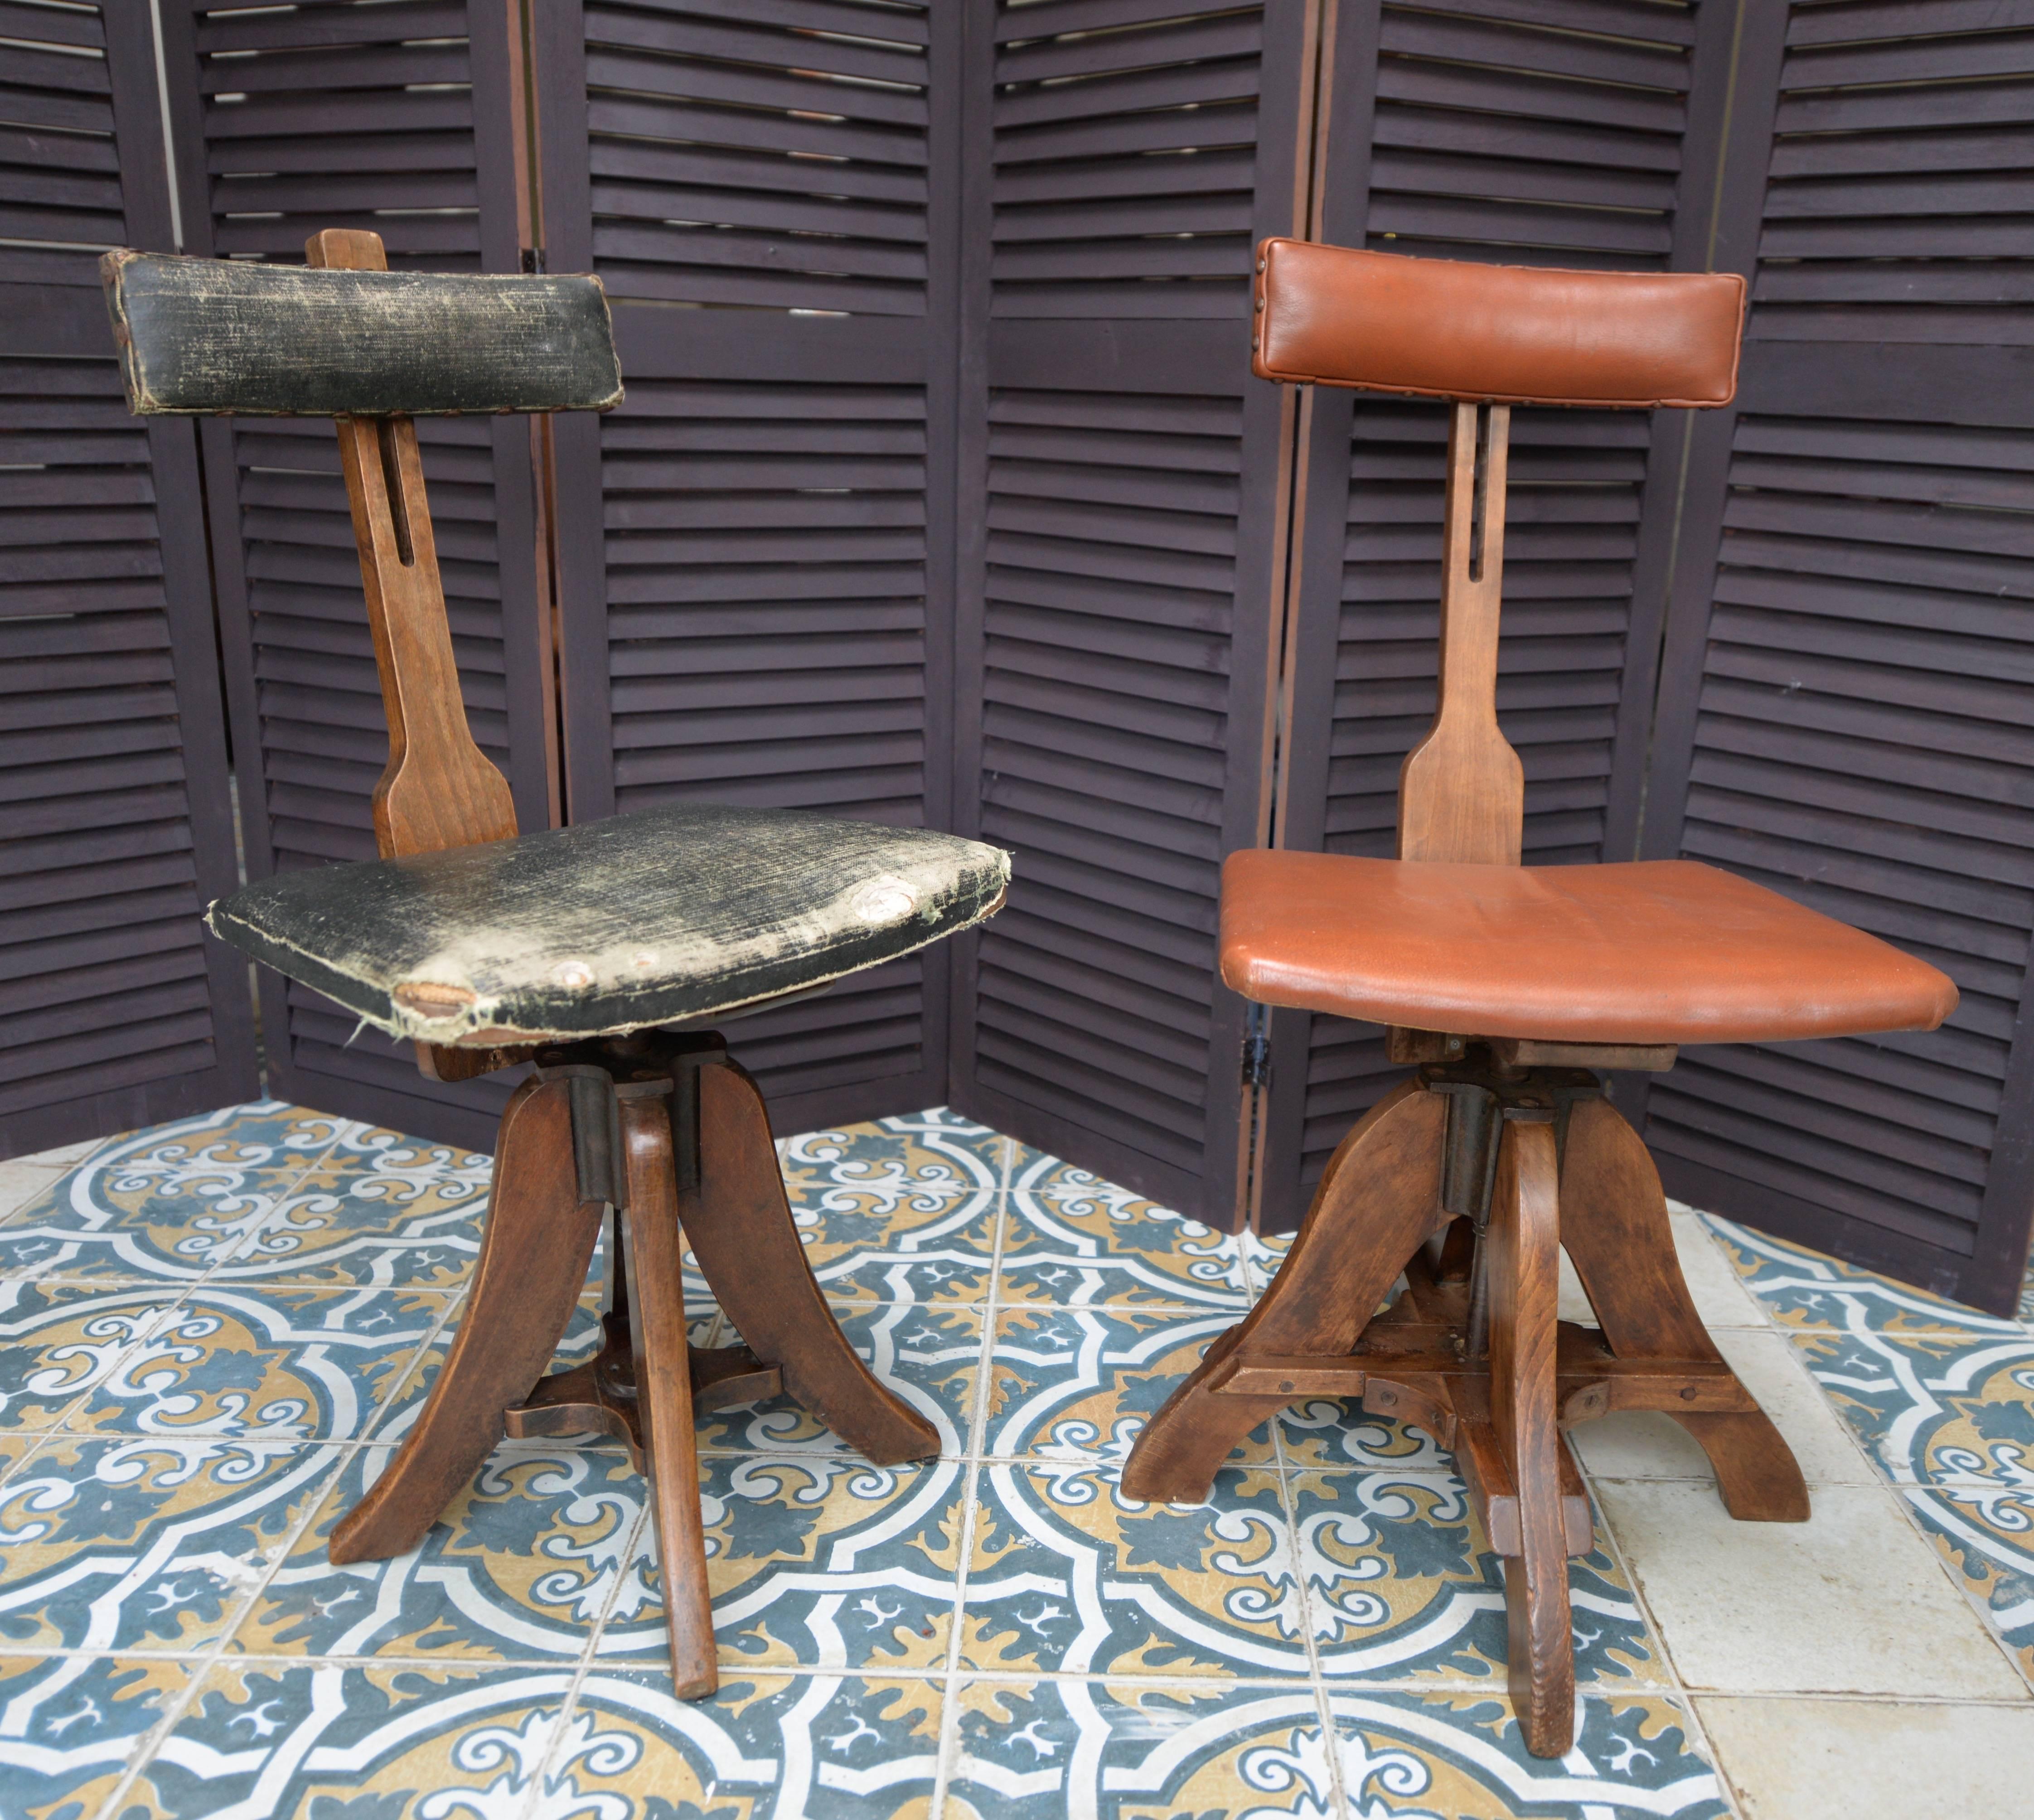 A stylish pair of mahogany framed artist's or draughtsman’s chairs from the late 19th century. Both have an adjustable backrest as well as a swivel adjustable seat. Stamped with 'Glenister High Wycombe' numbered 43 and 44, both chairs are in their